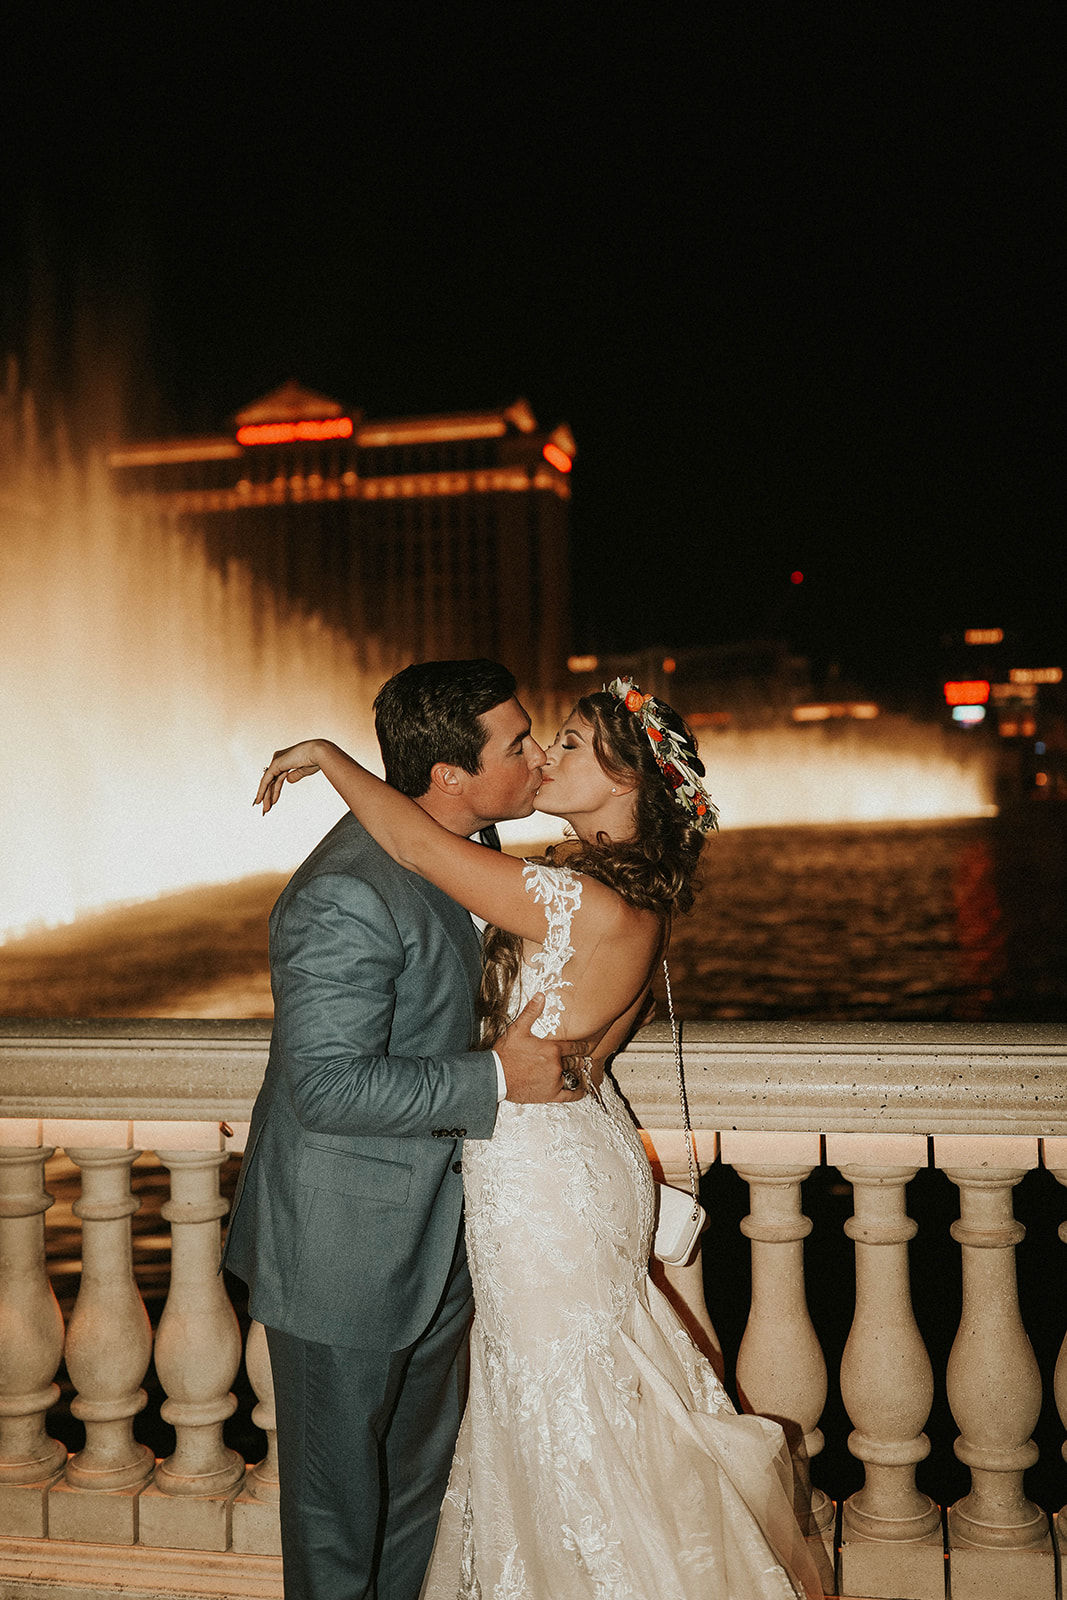 Newlyweds Kissing at Bellagio Fountain after Dry Lake Bed Fall Inspired Elopement with Just the Two of Them 